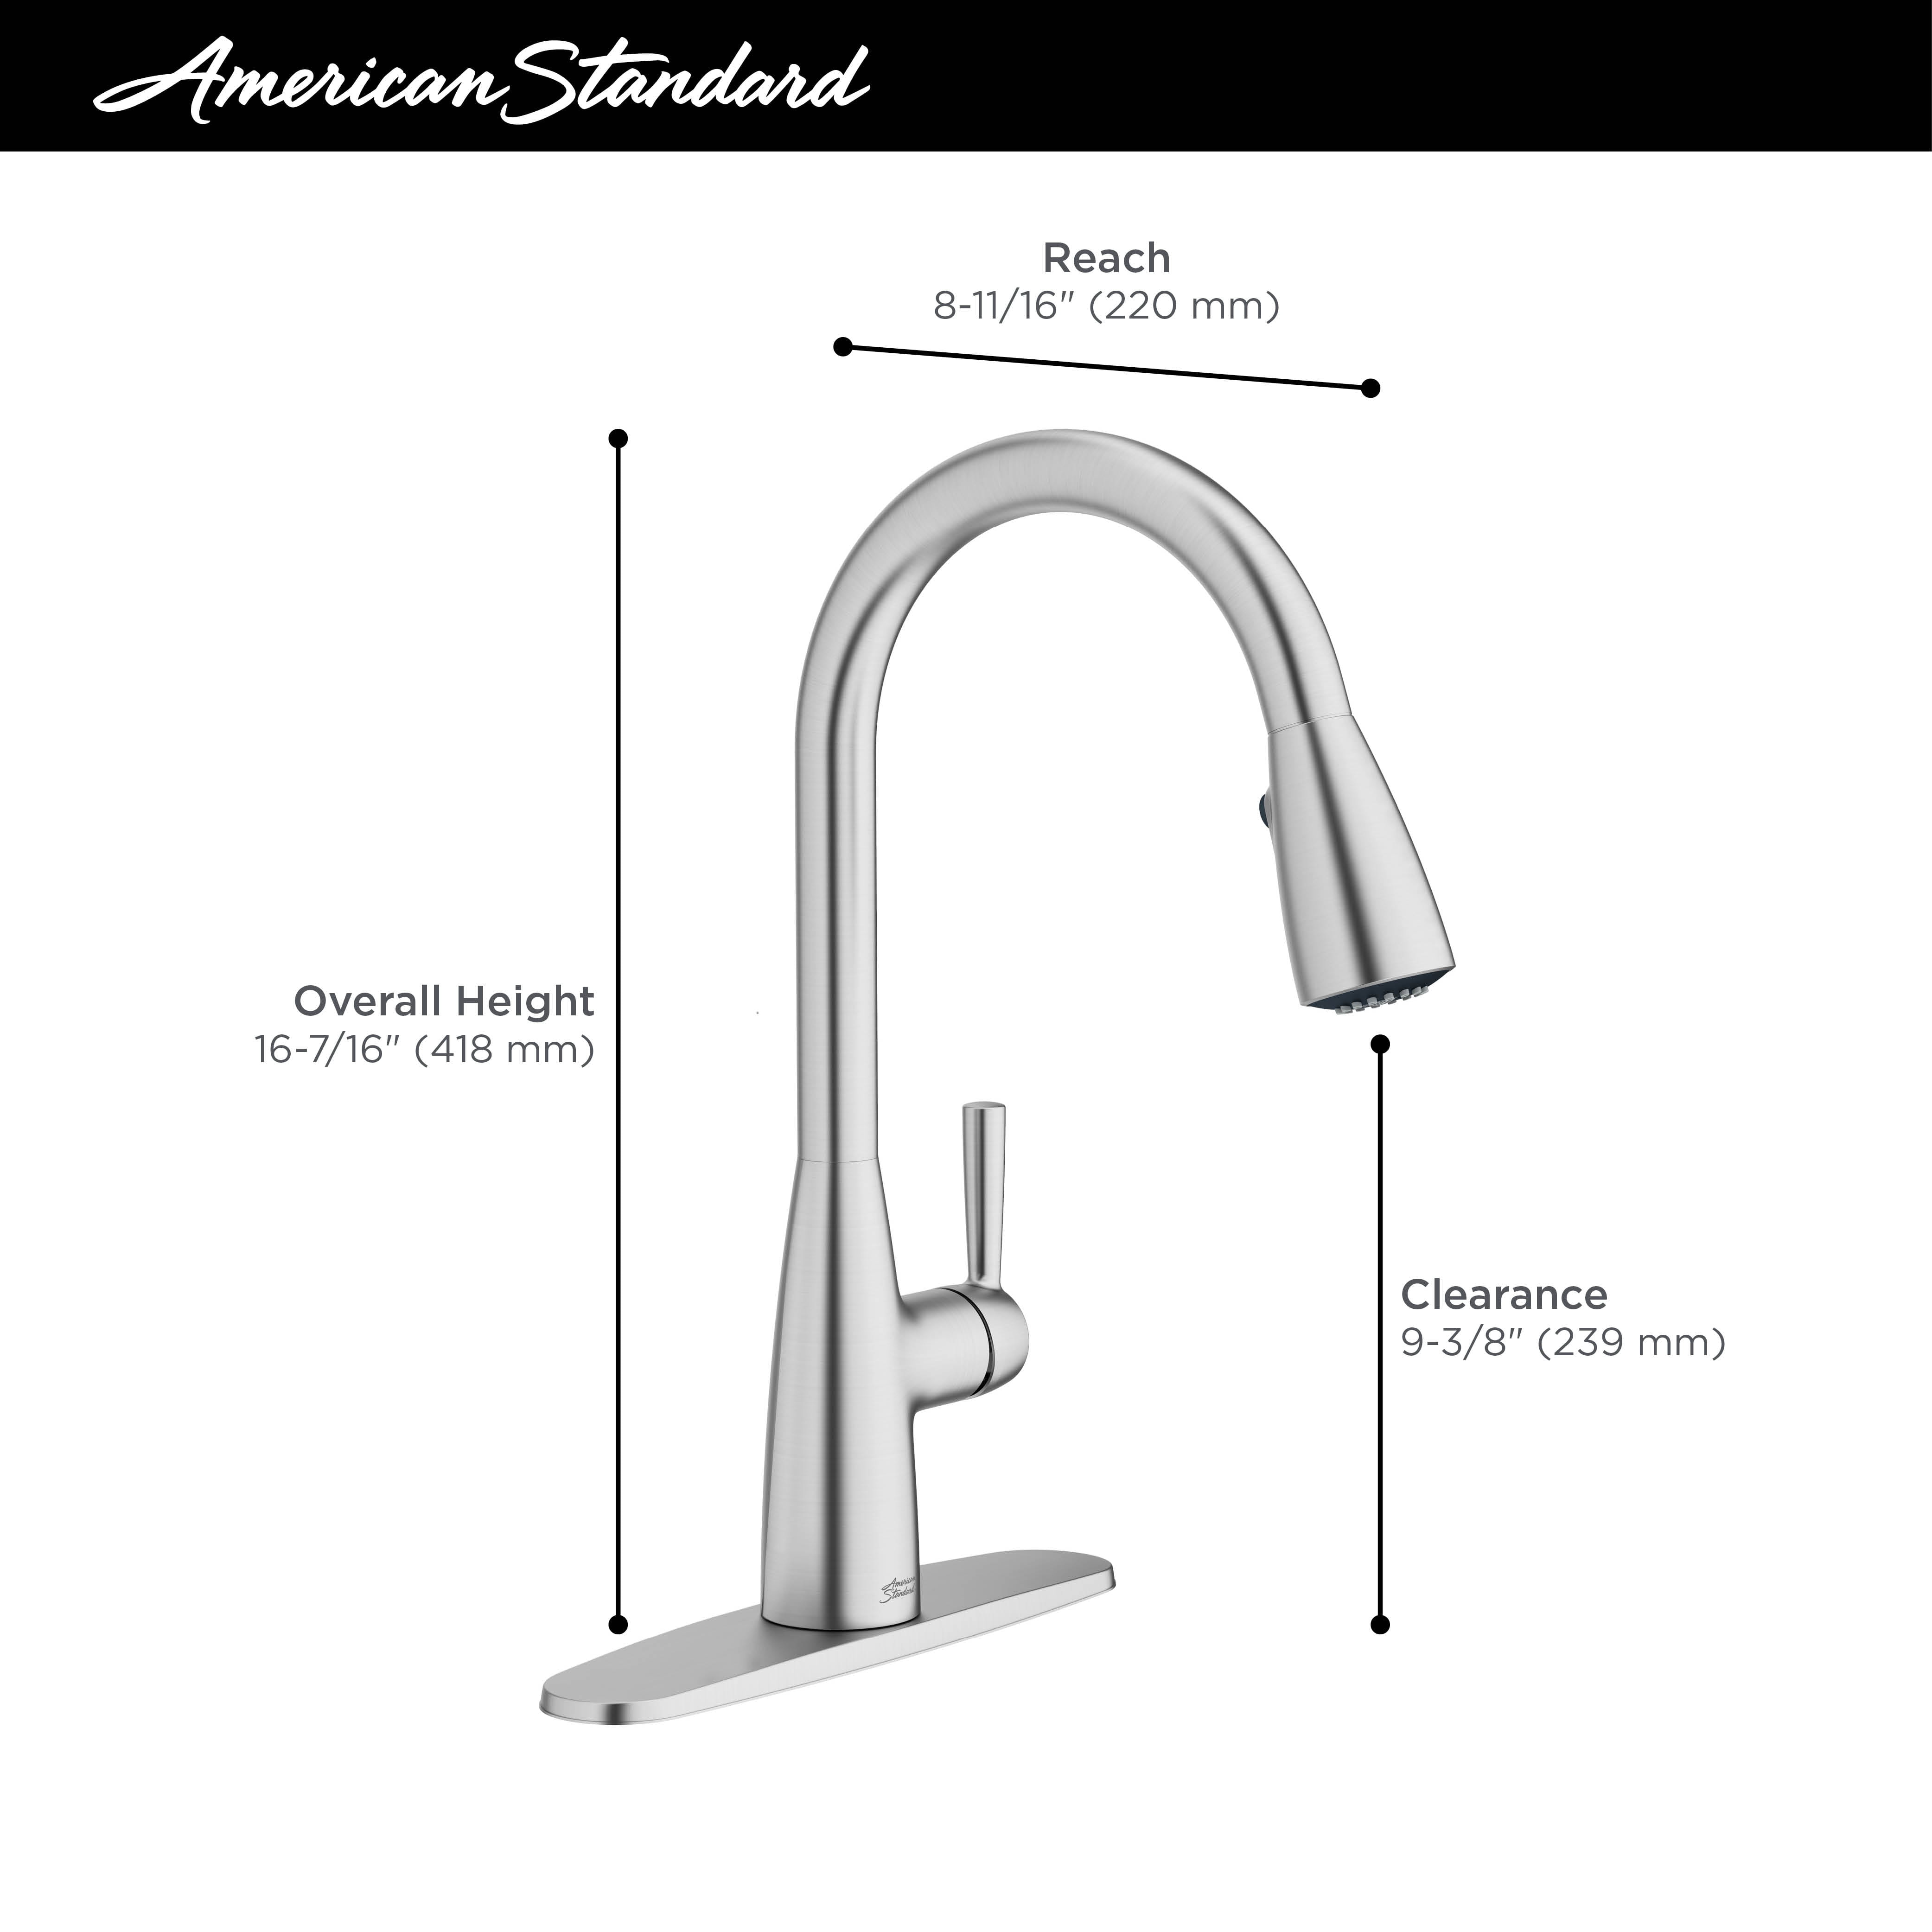 Fairbury Single-Handle Pull-Down Dual Spray Kitchen Faucet 1.8 GPM with Lever Handle